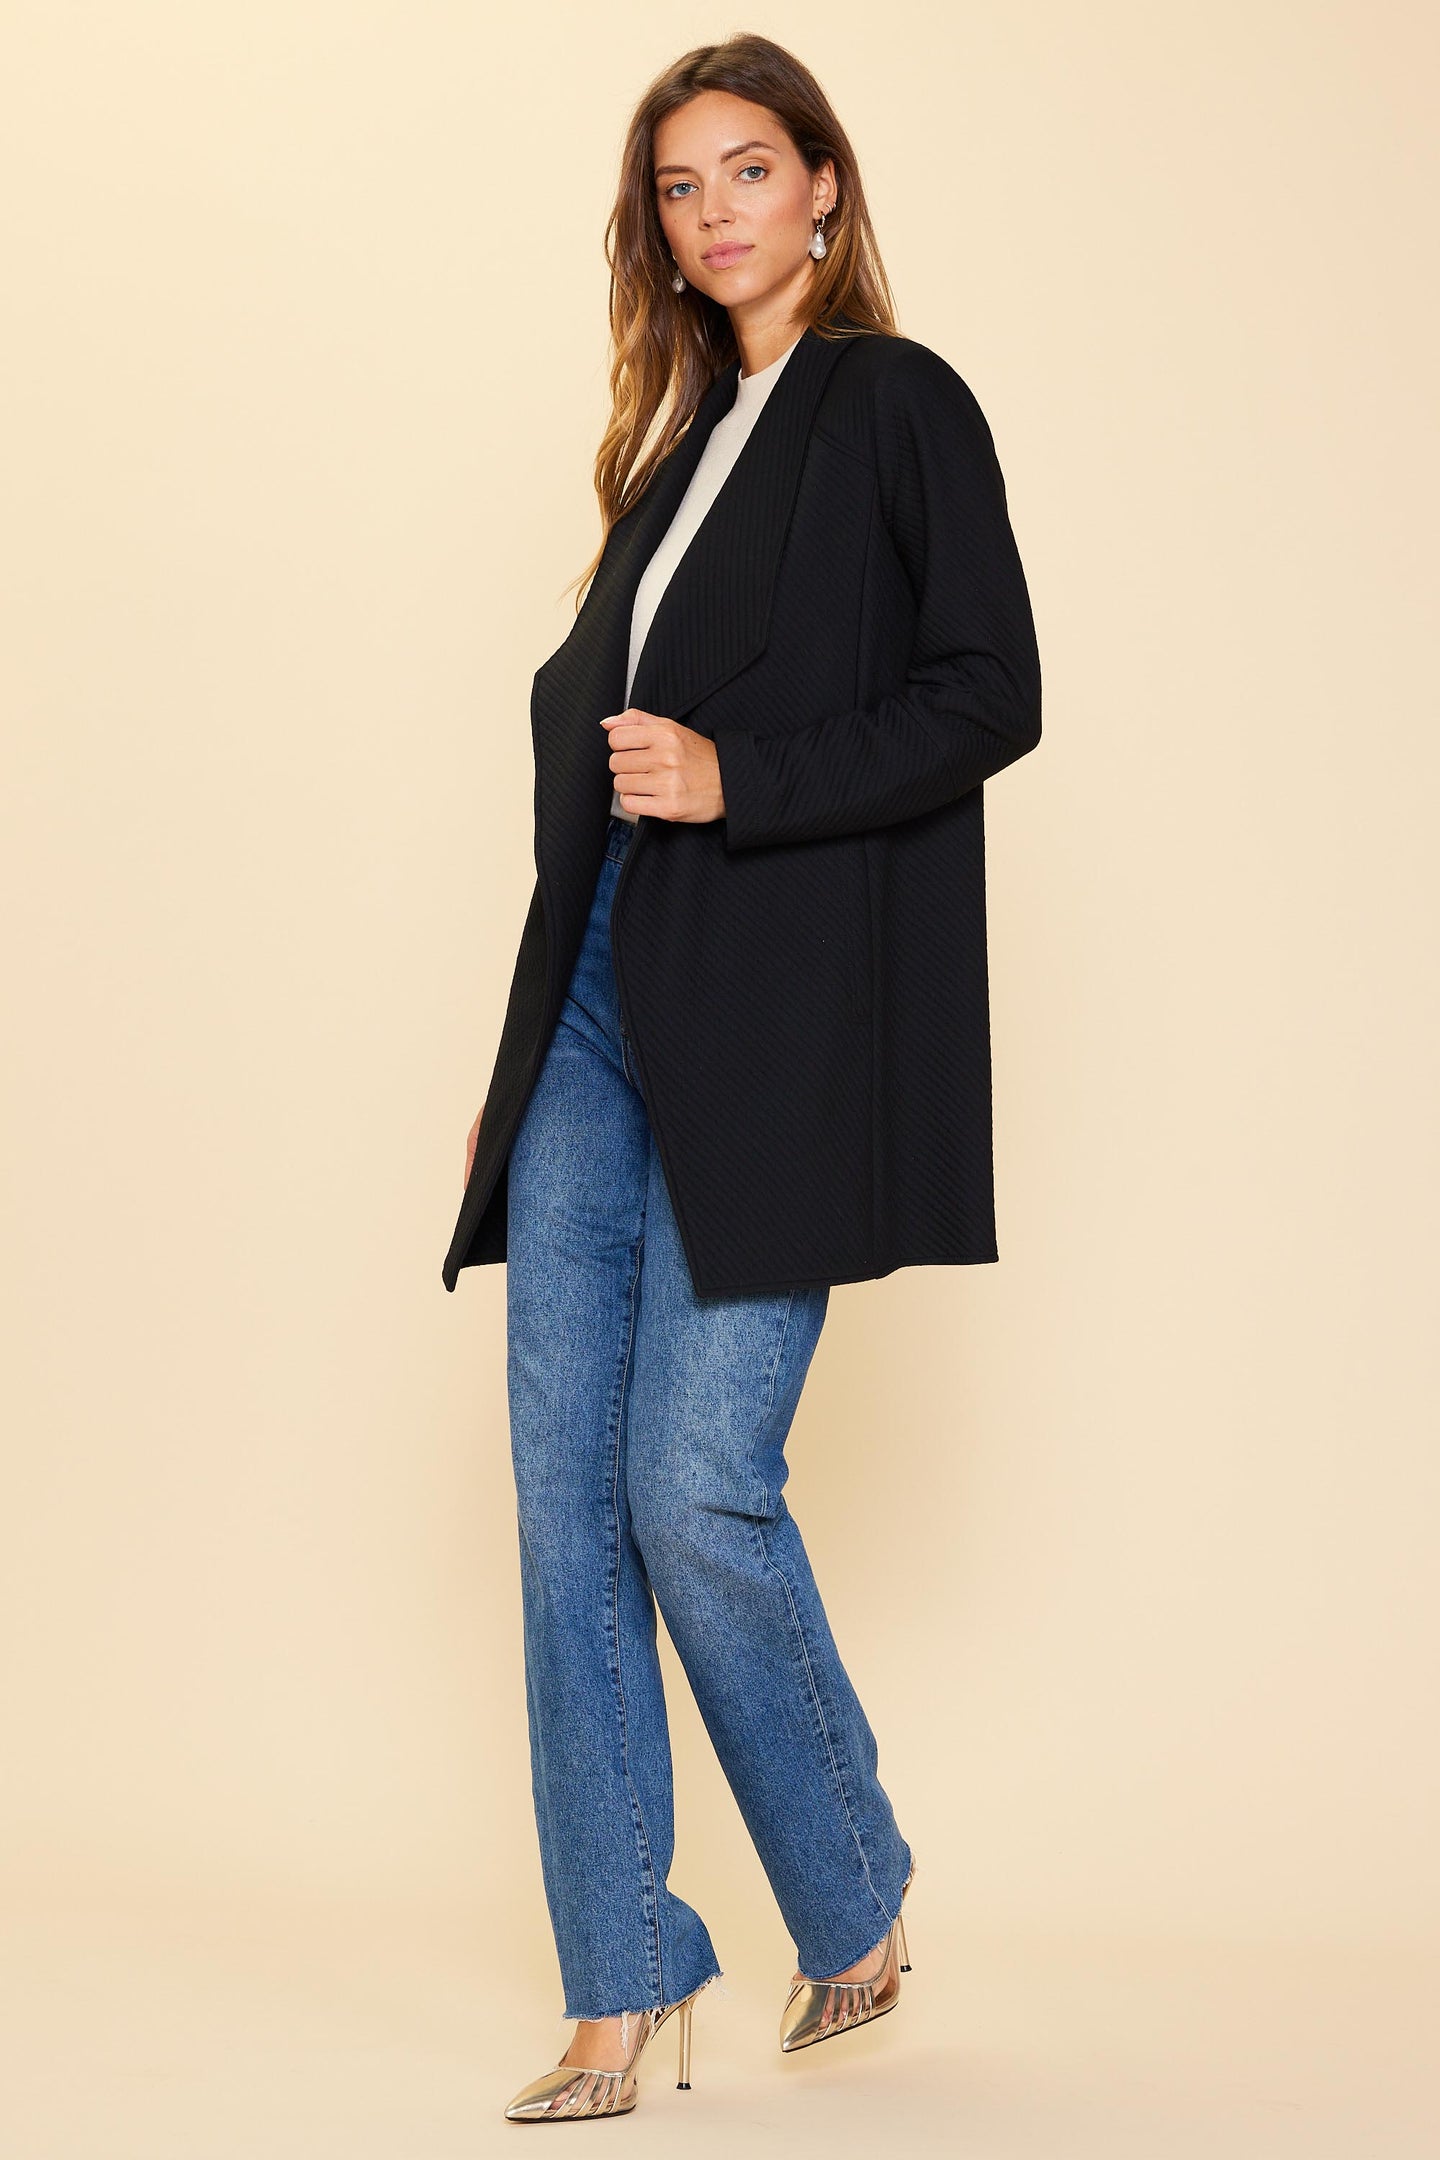 BLUE Front ARE SKIES Cardigan Open –